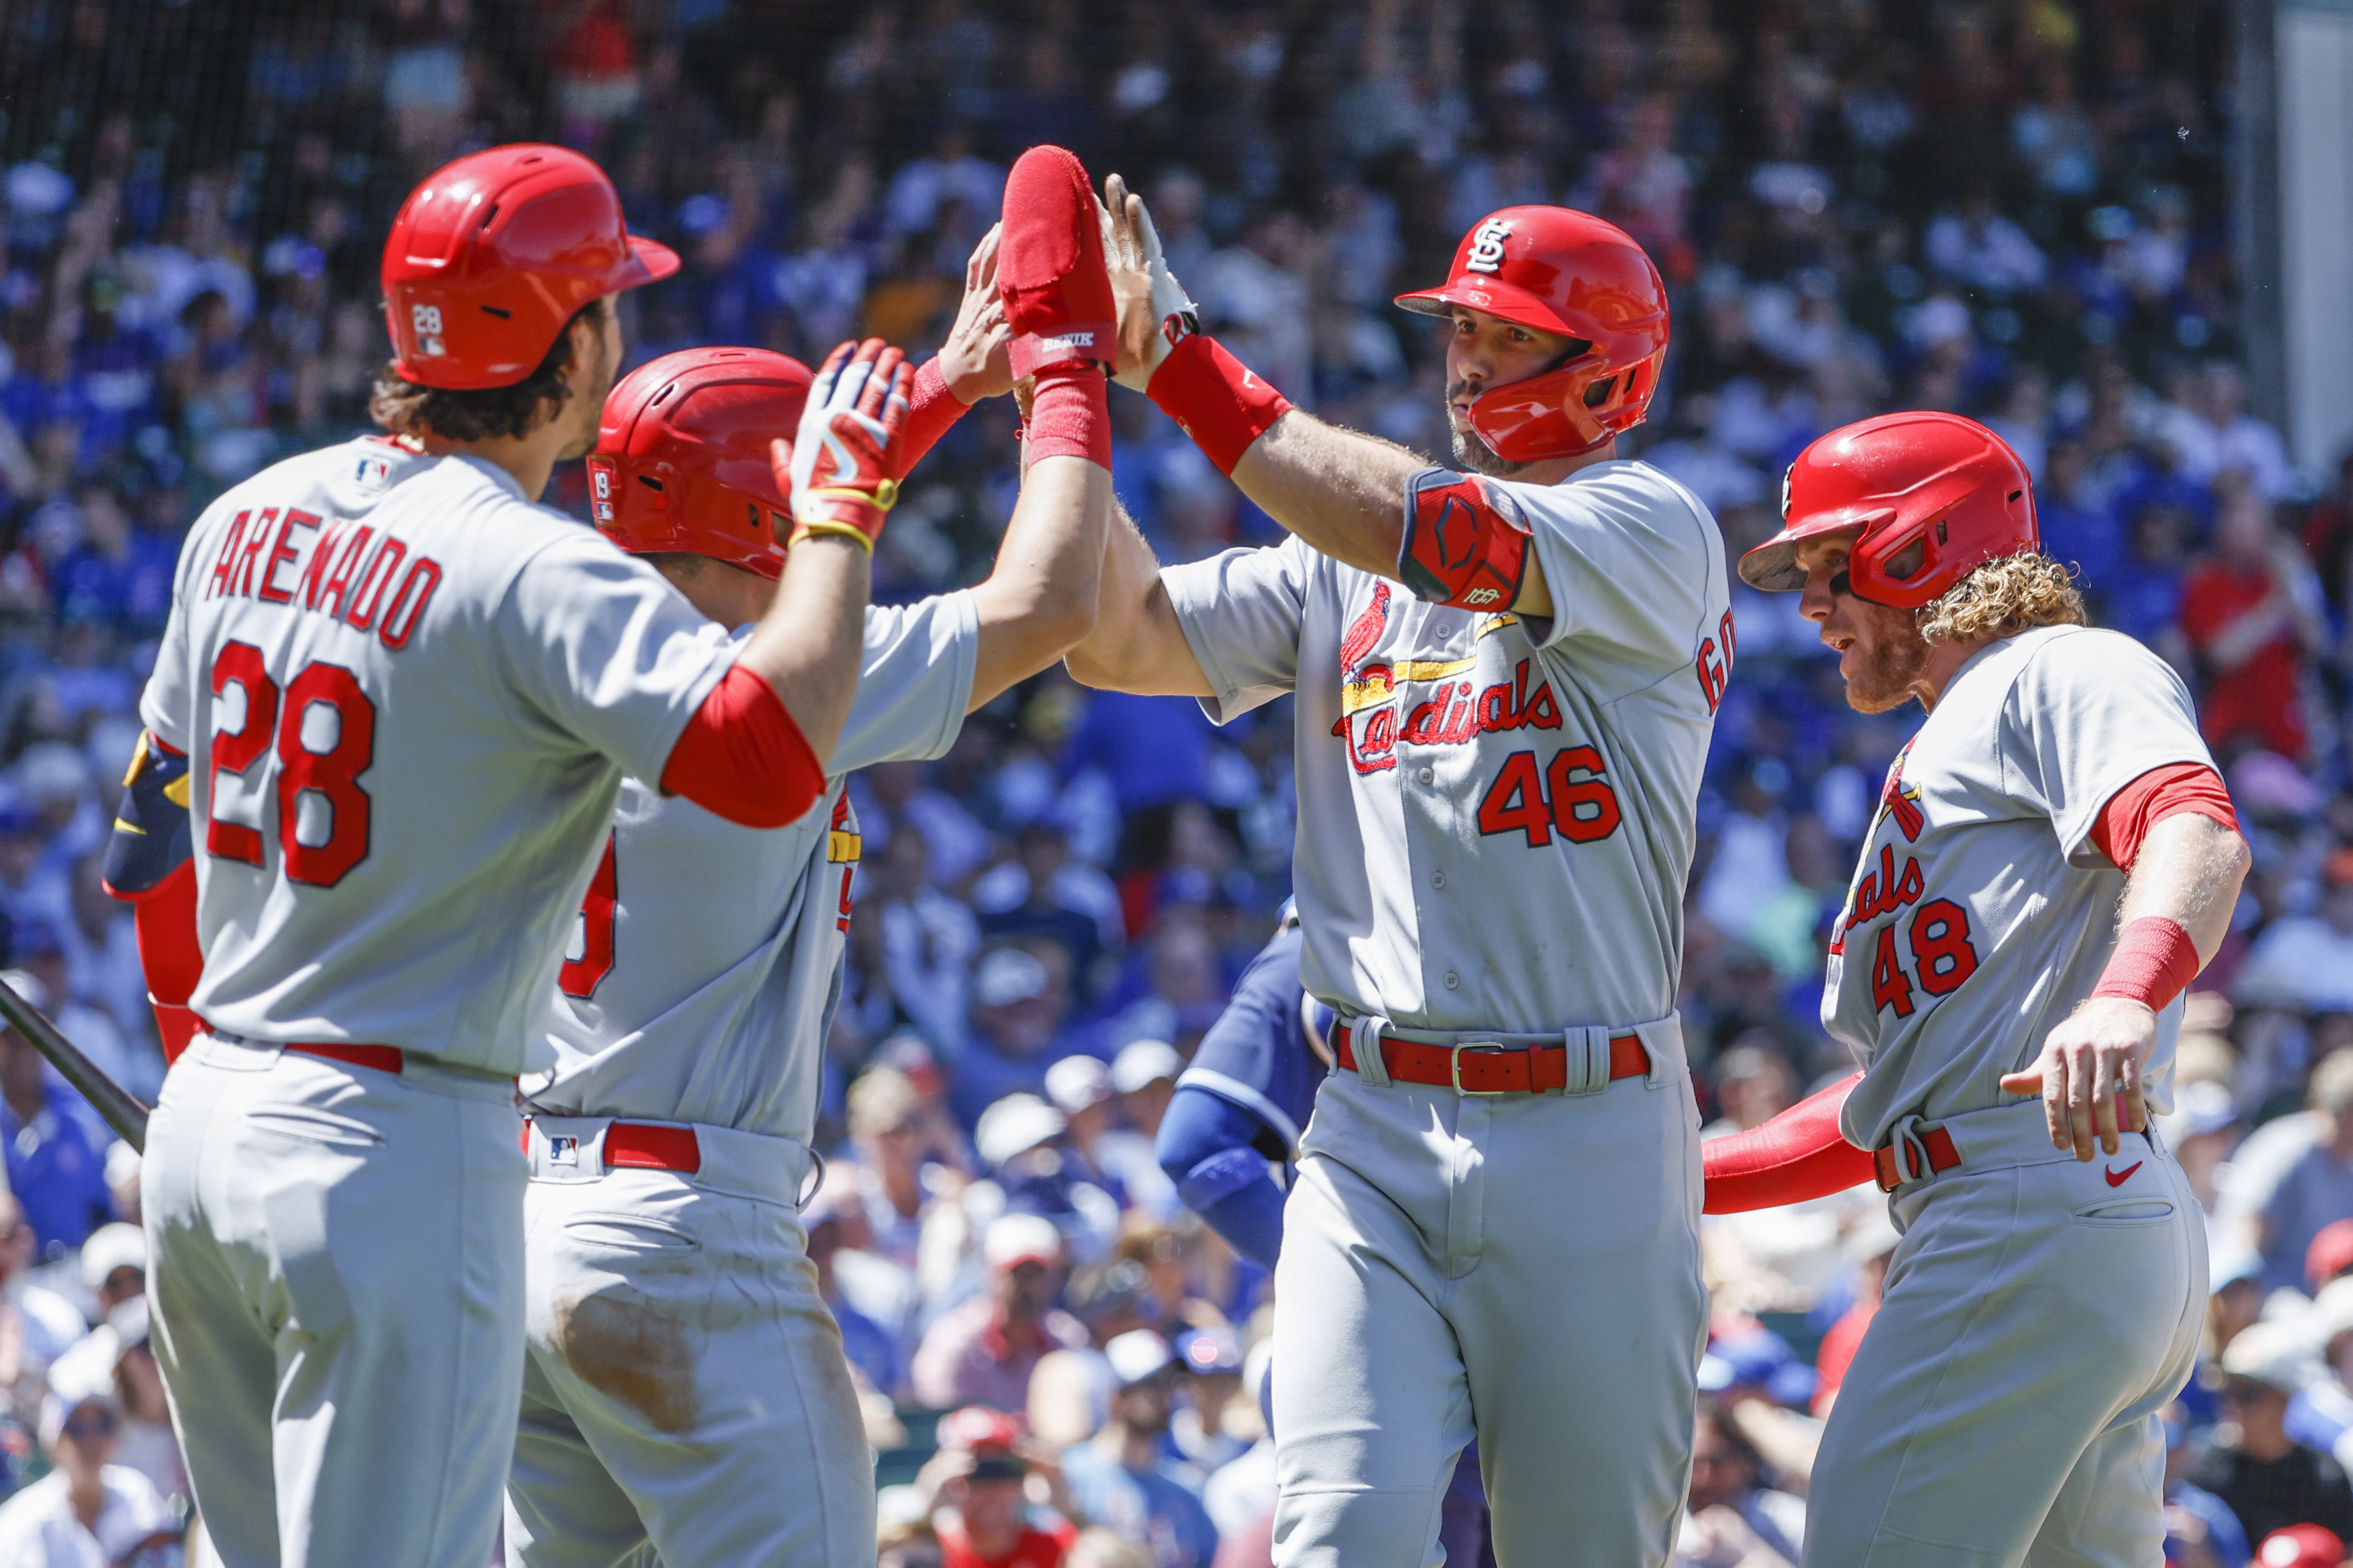 St. Louis Cardinals on X: We have made the following roster moves